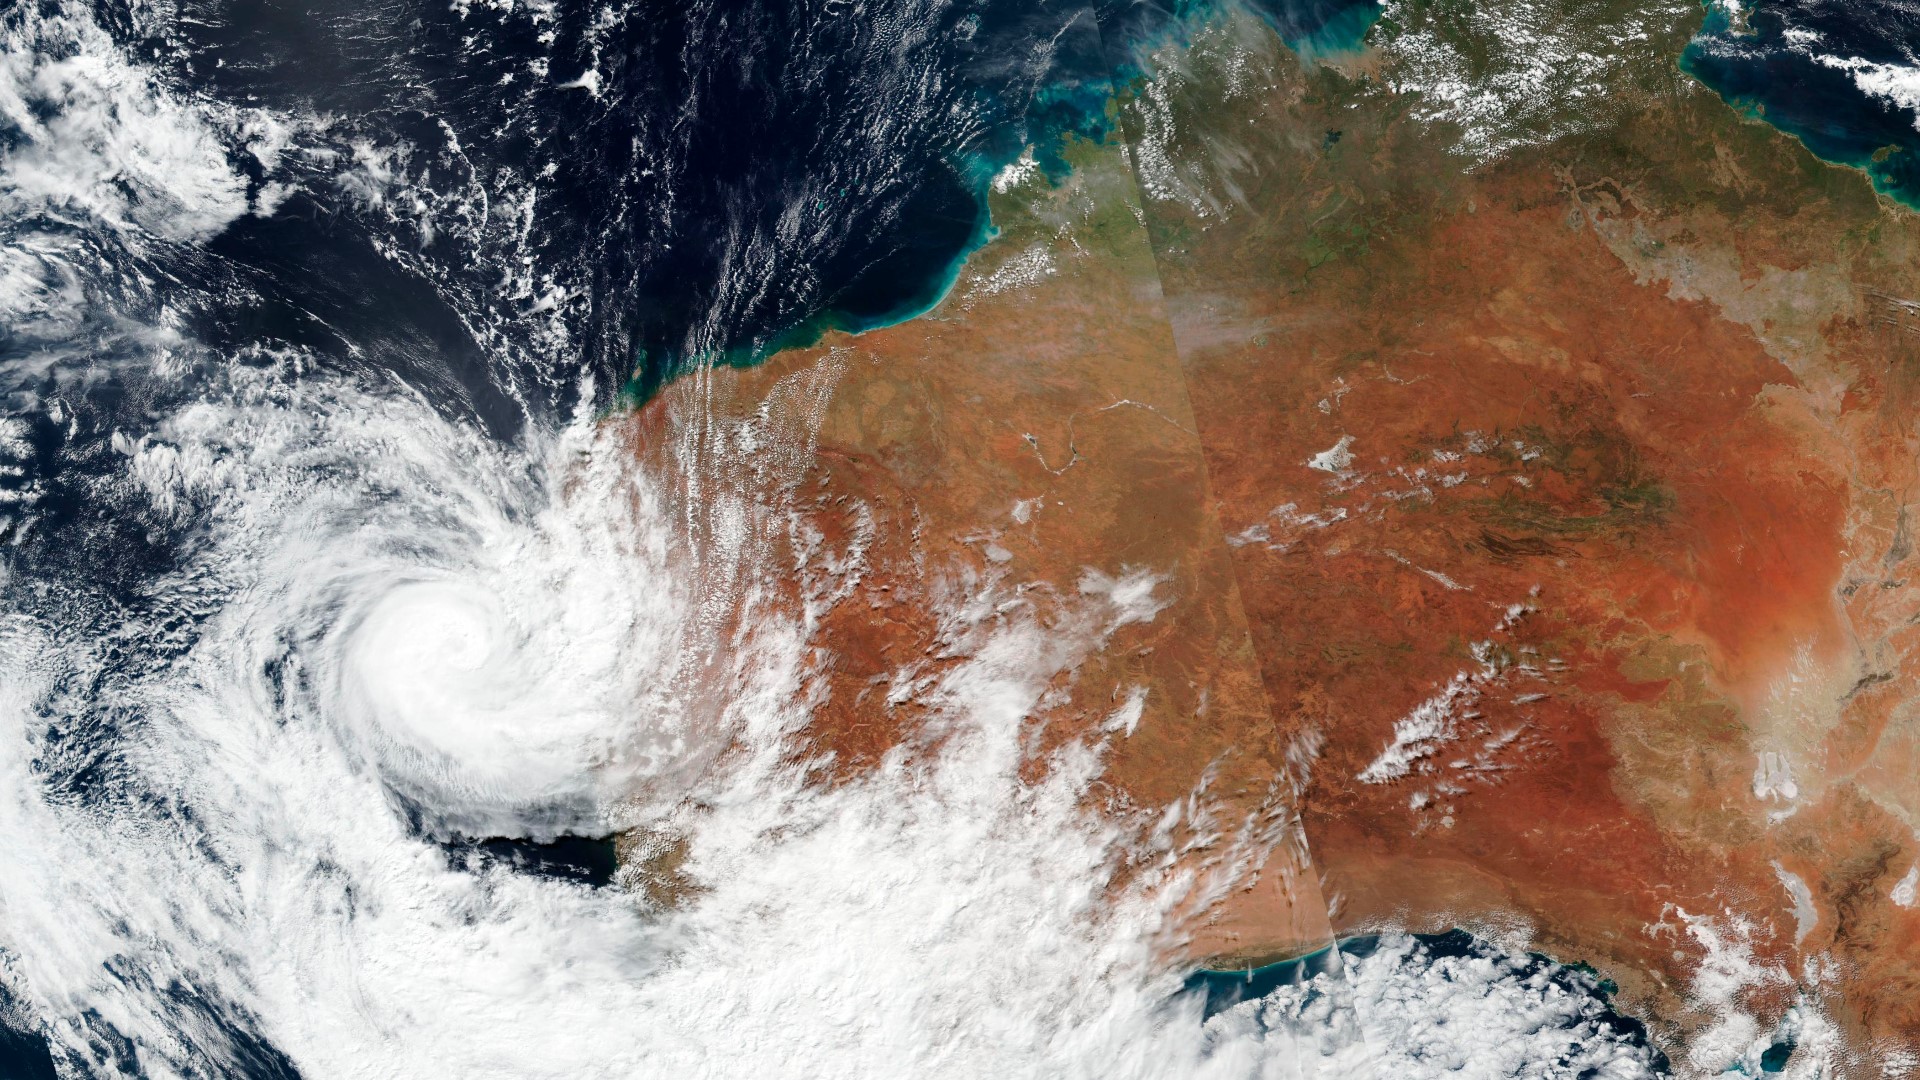 Cyclone damages several towns on Australia’s western coast